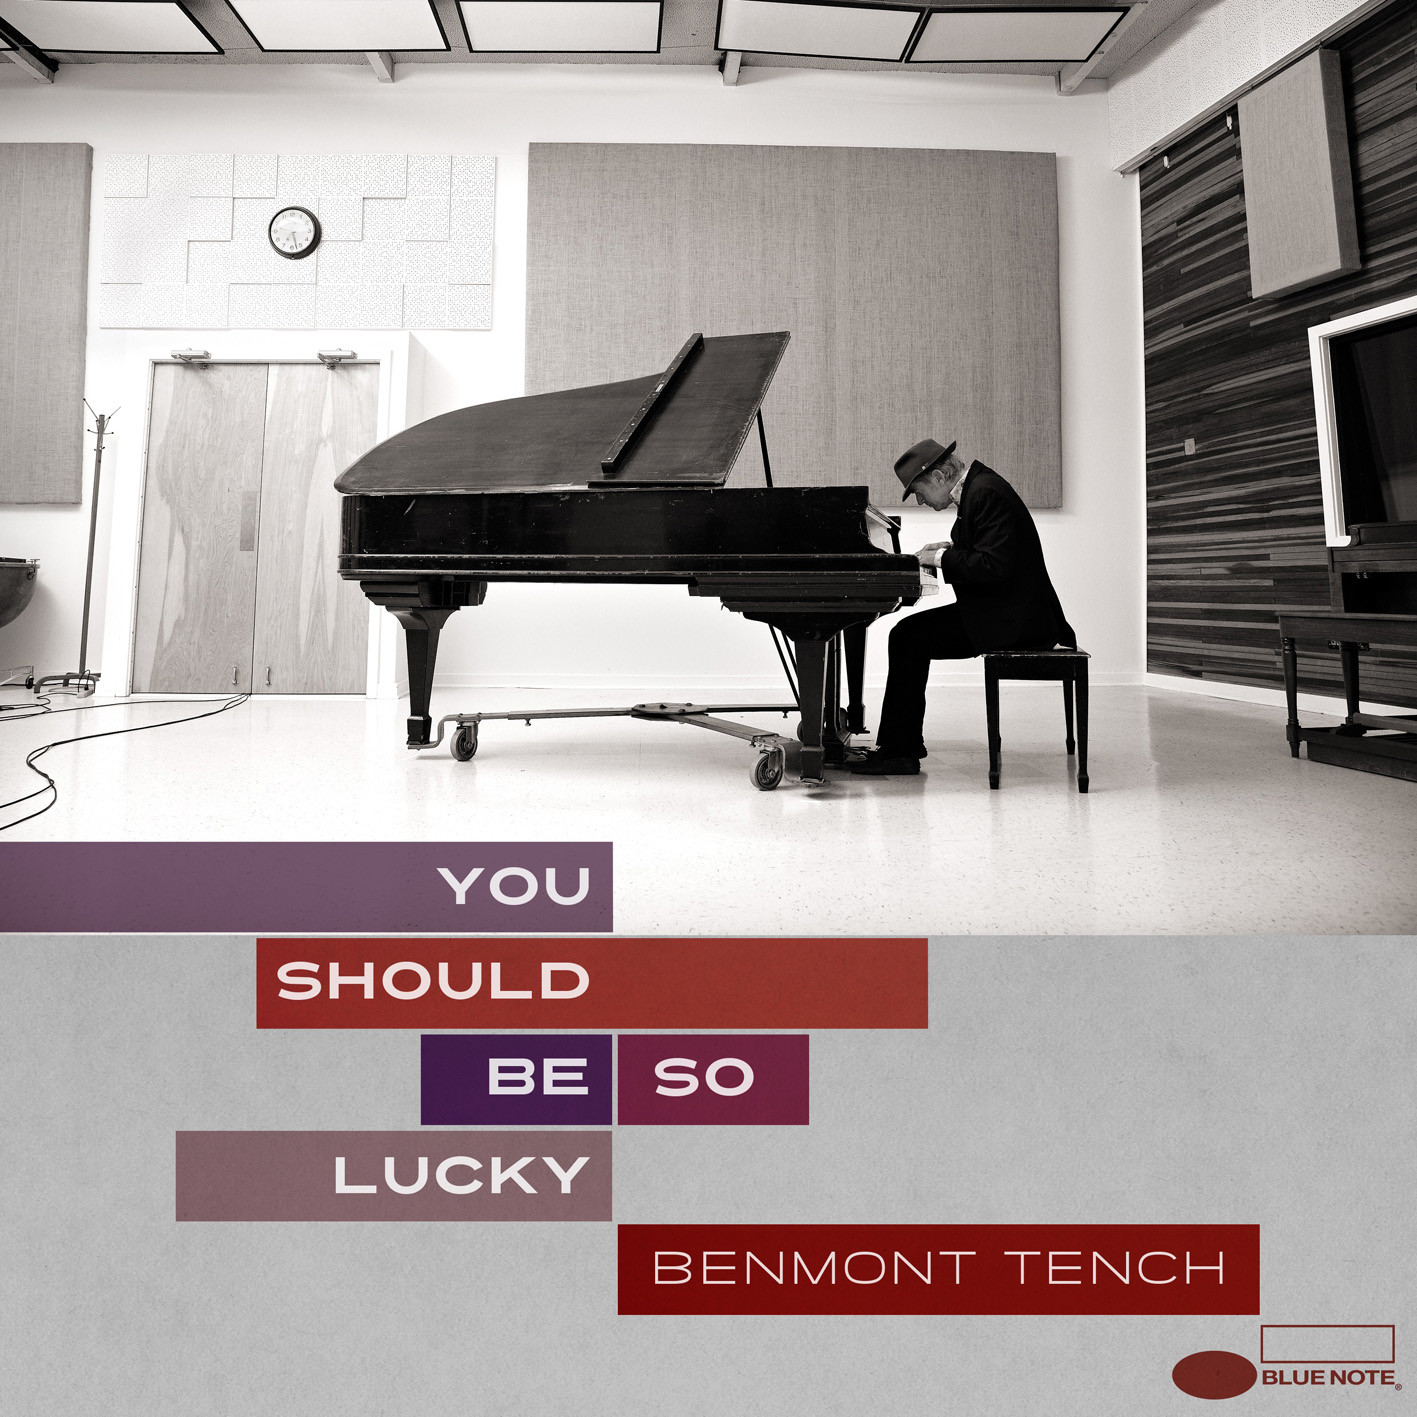 Benmont Tench – You Should Be So Lucky (2014) [HDTracks FLAC 24bit/96kHz]